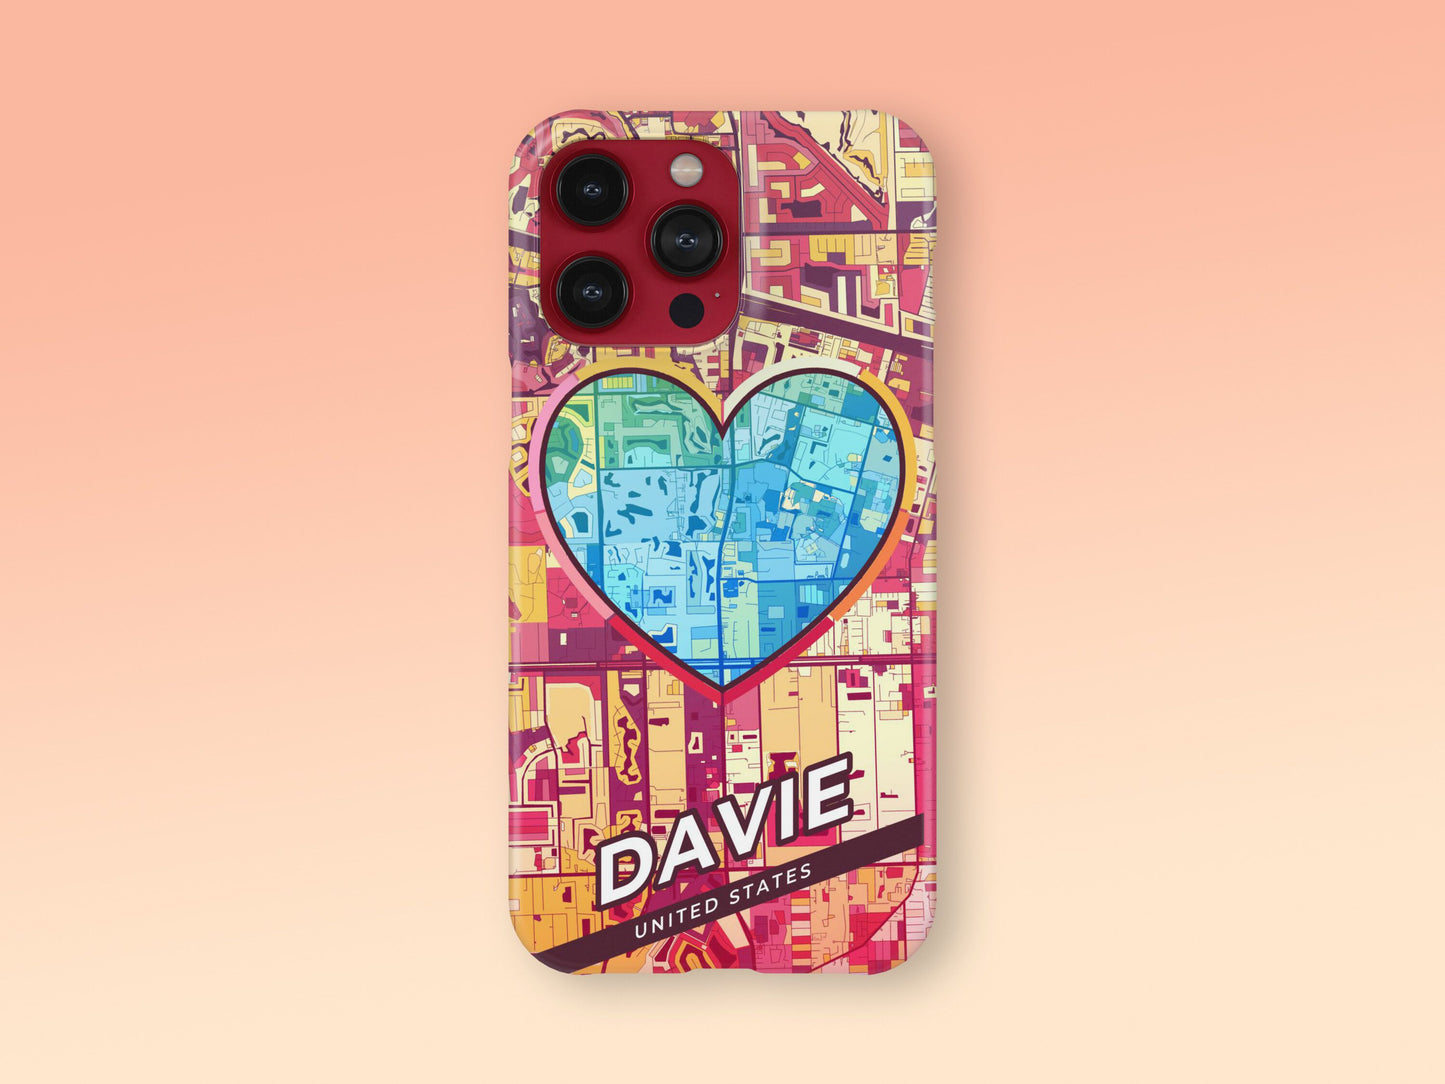 Davie Florida slim phone case with colorful icon. Birthday, wedding or housewarming gift. Couple match cases. 2